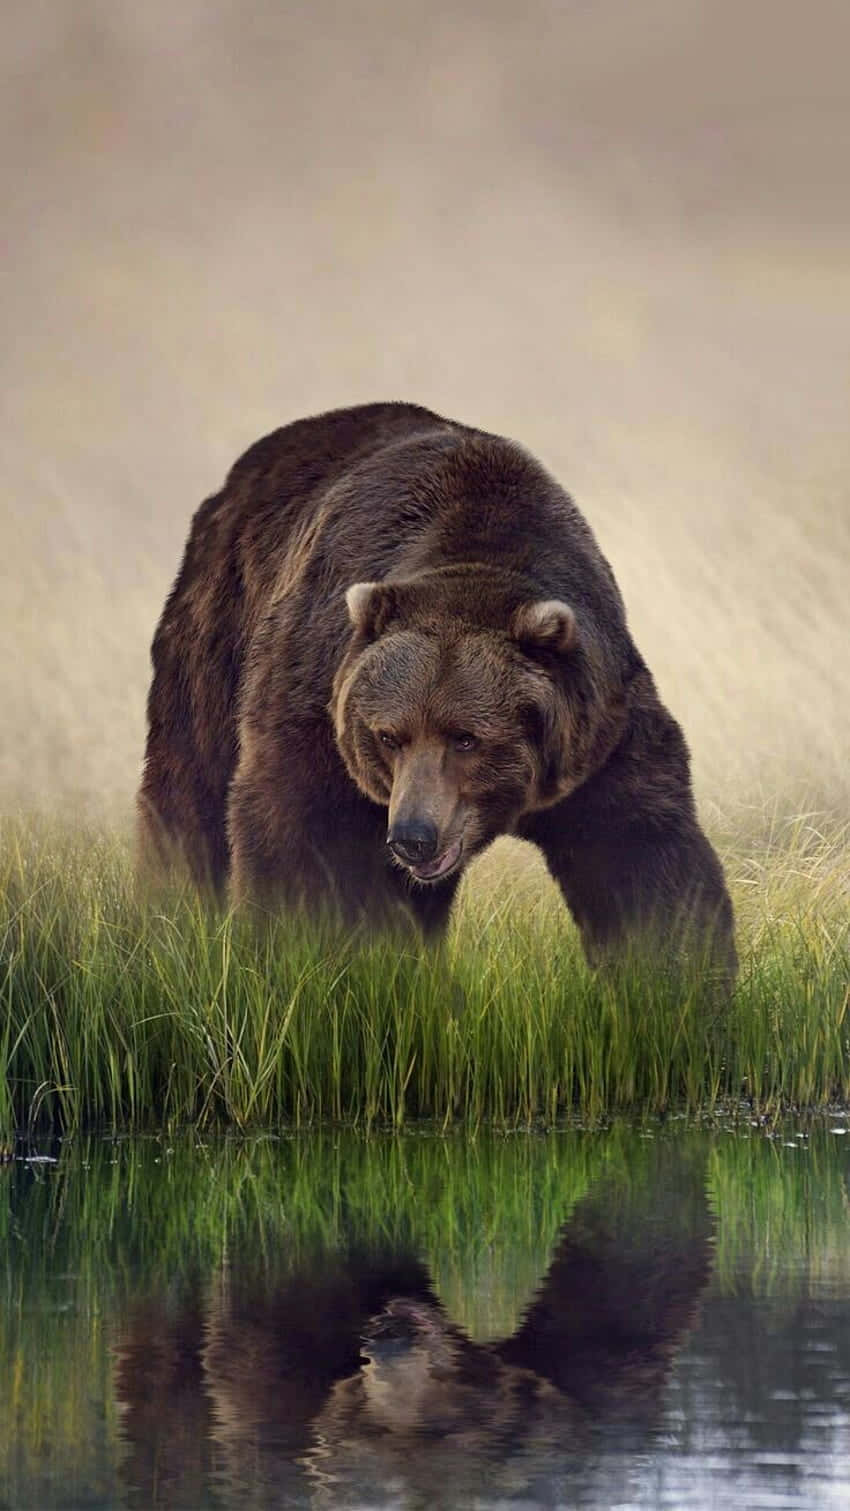 Grizzly Bear Approaching Water Reflection.jpg Wallpaper